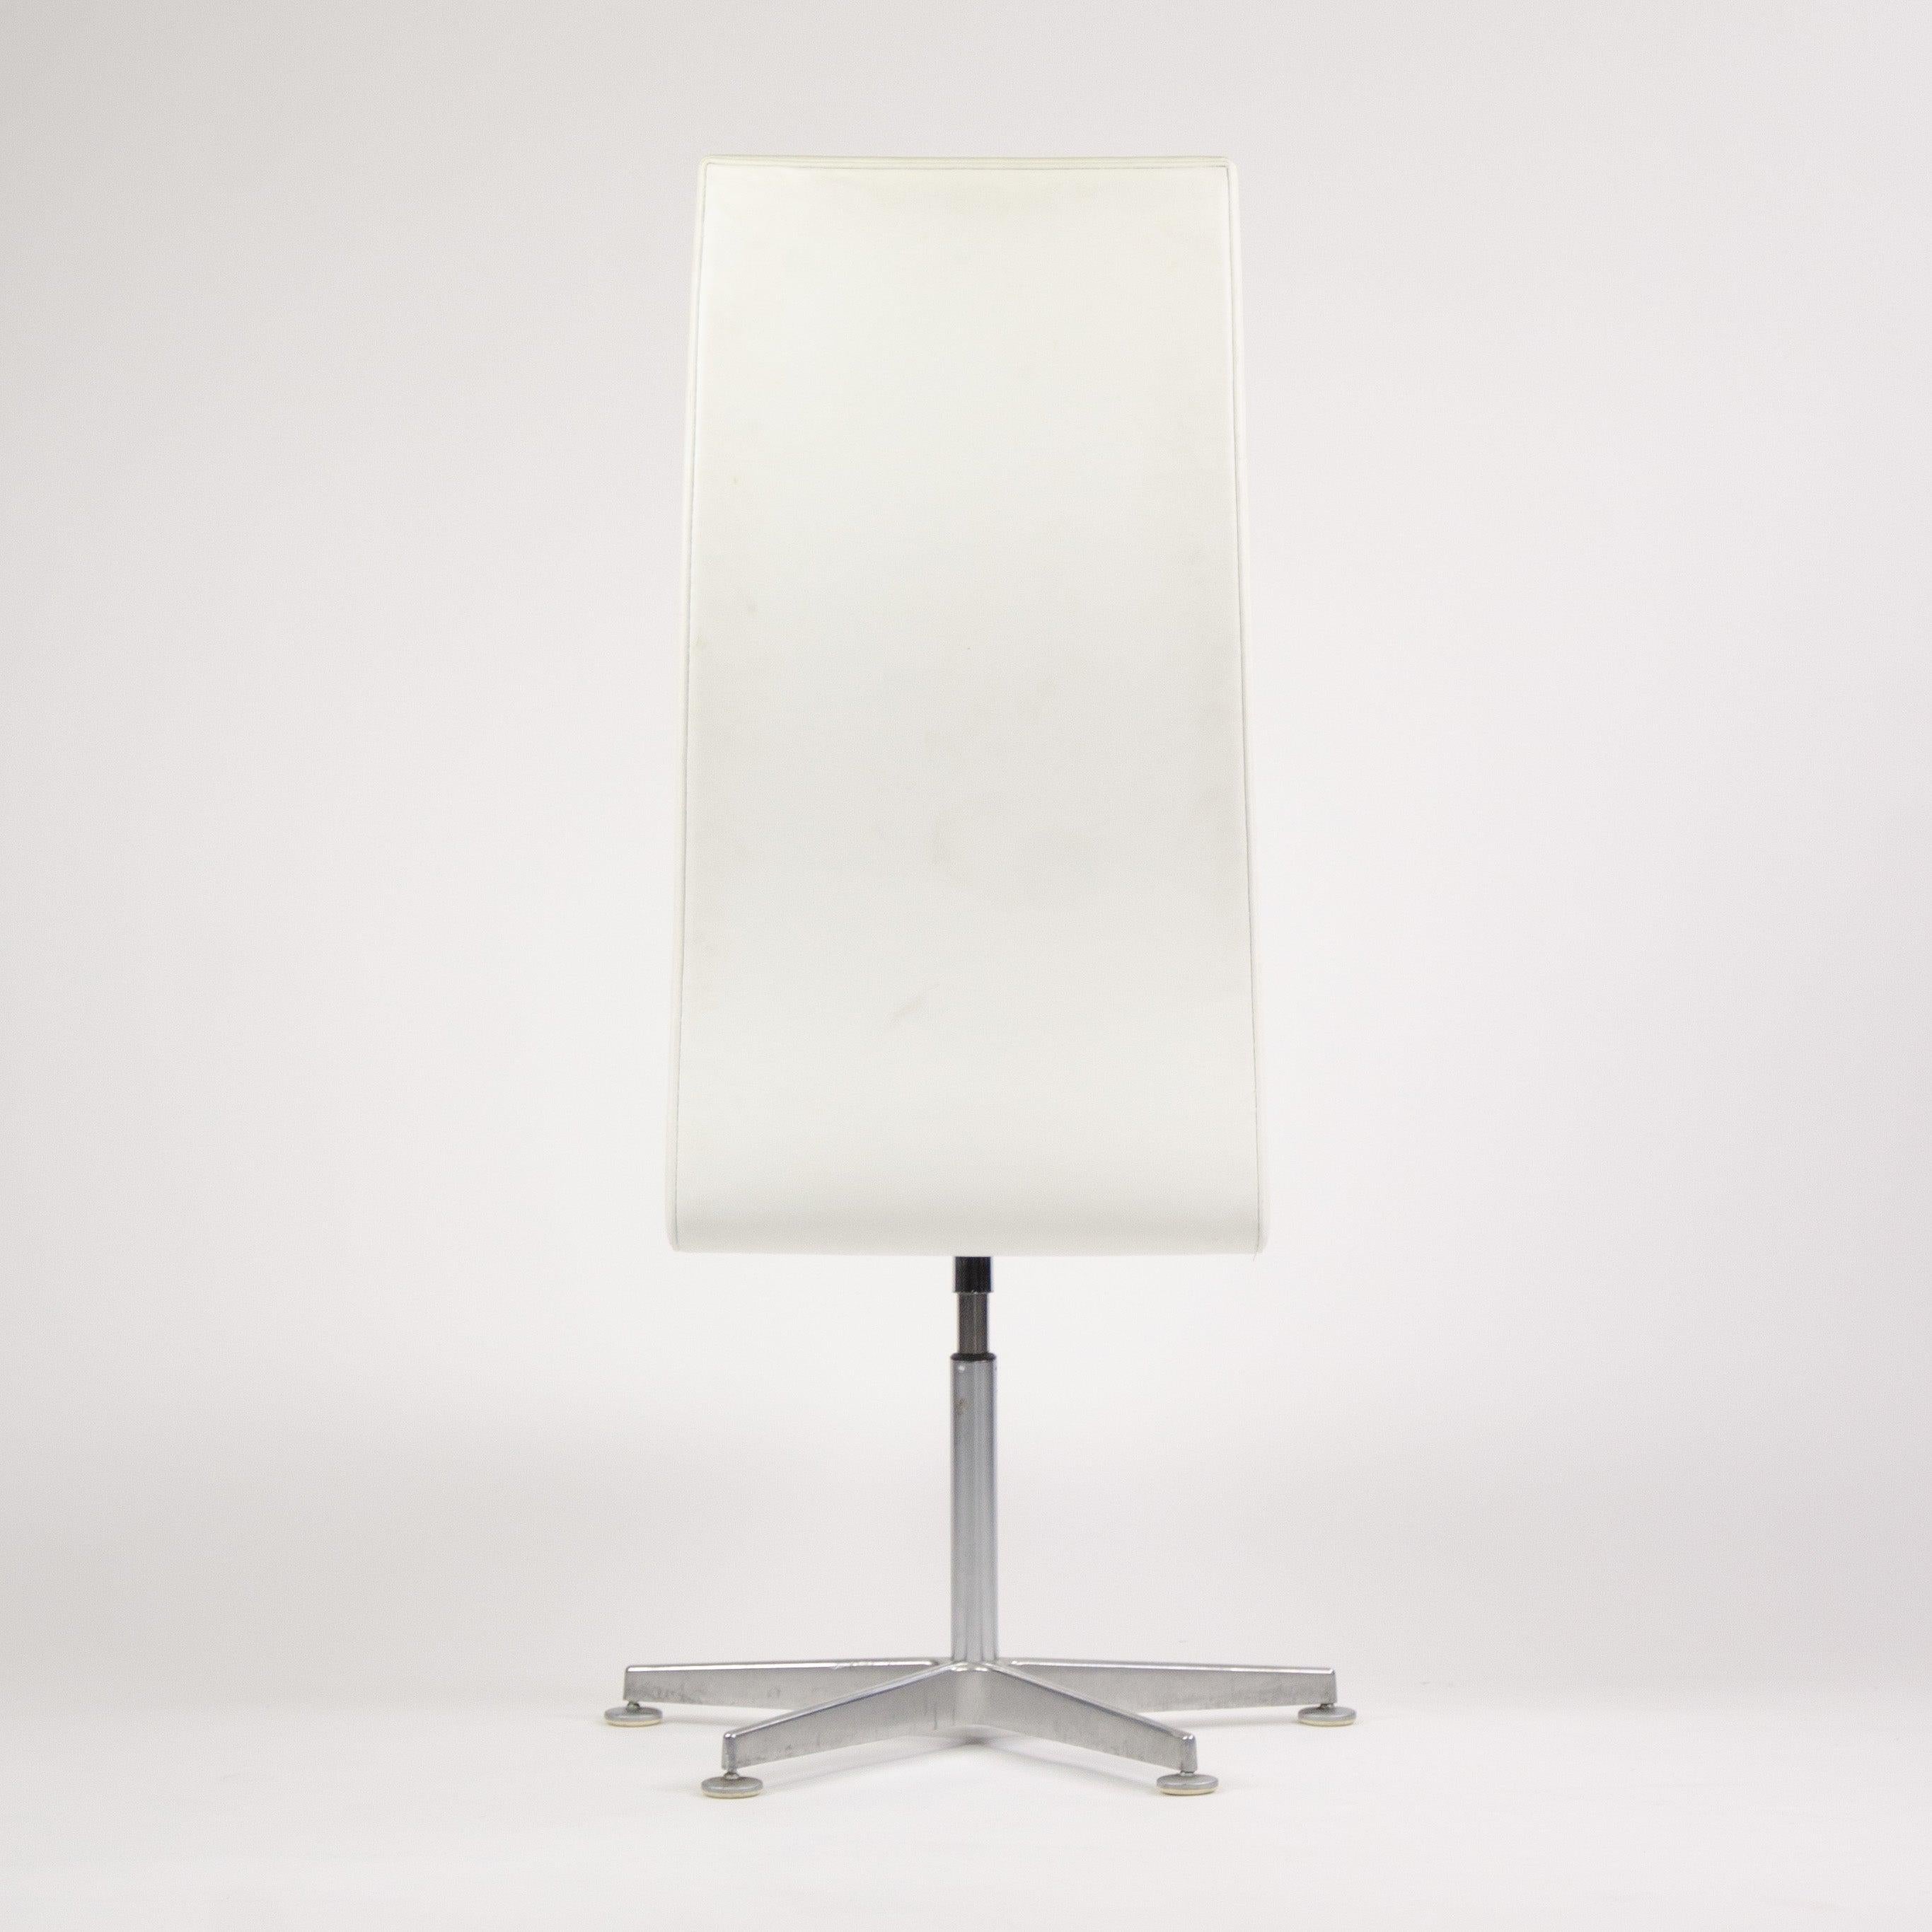 Aluminum Fritz Hansen Arne Jacobsen Tall Oxford Chair White Leather 2007 4x Available For Sale